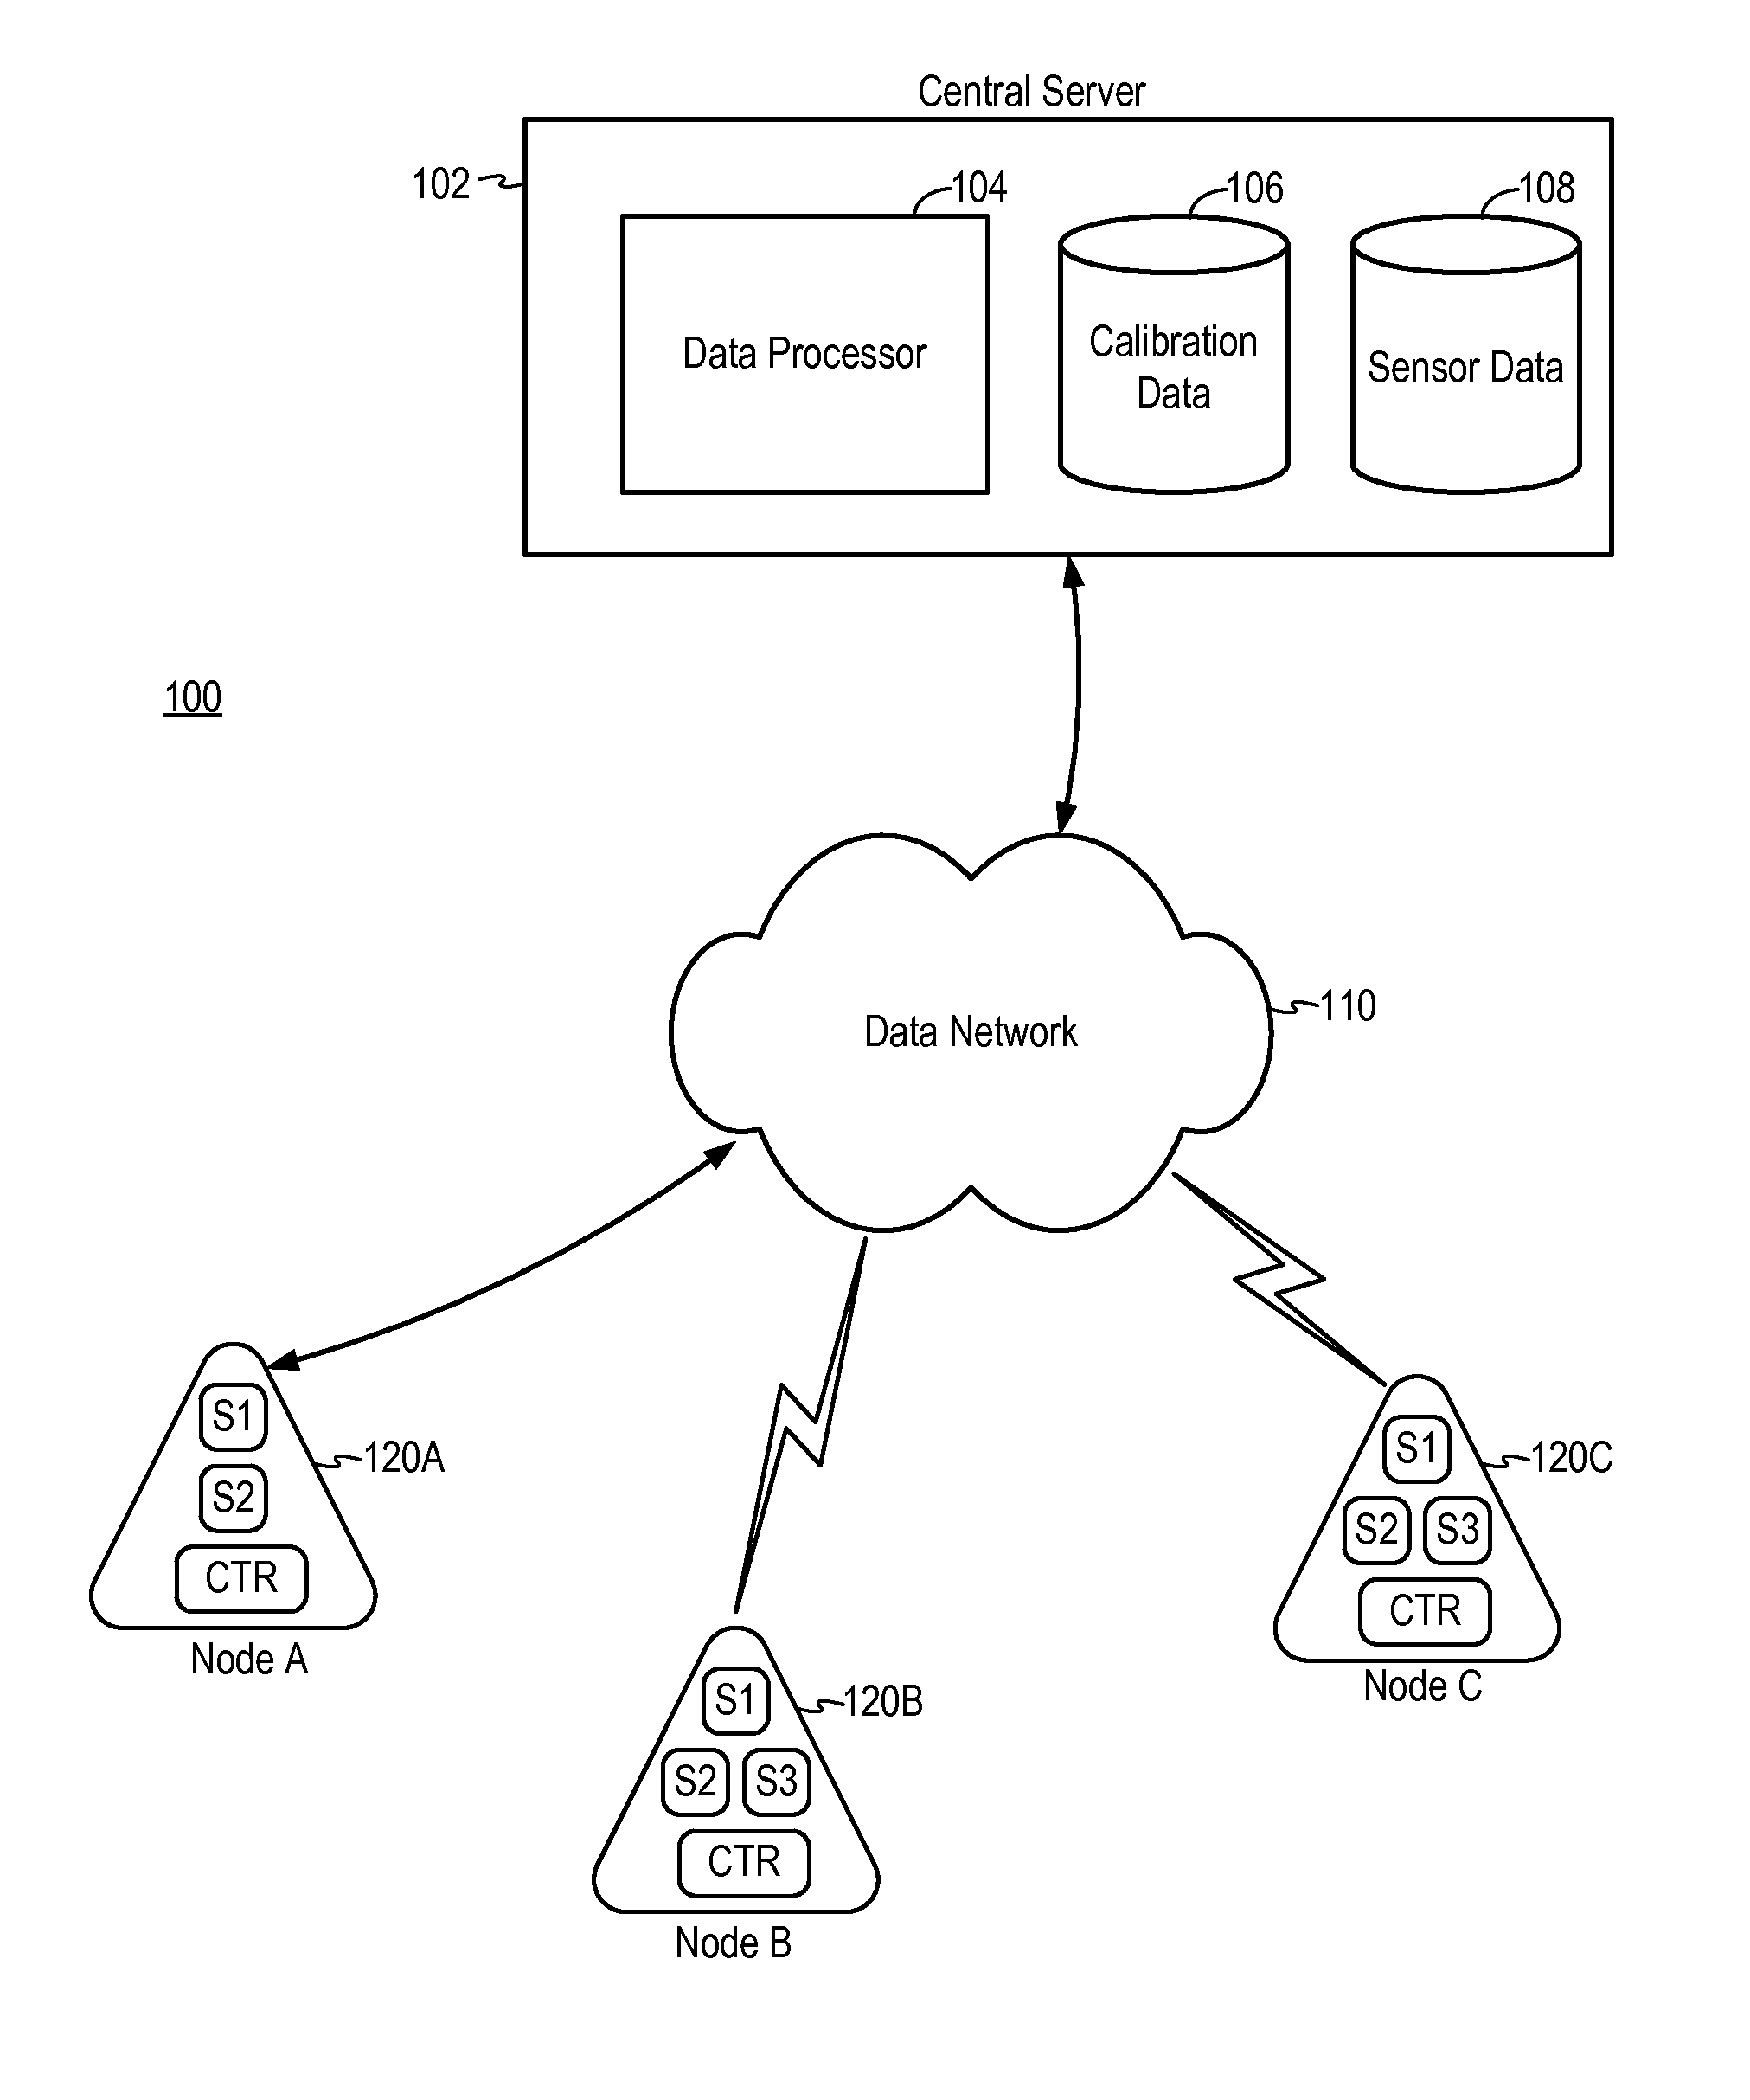 Distributed sensor system with remote sensor nodes and centralized data processing